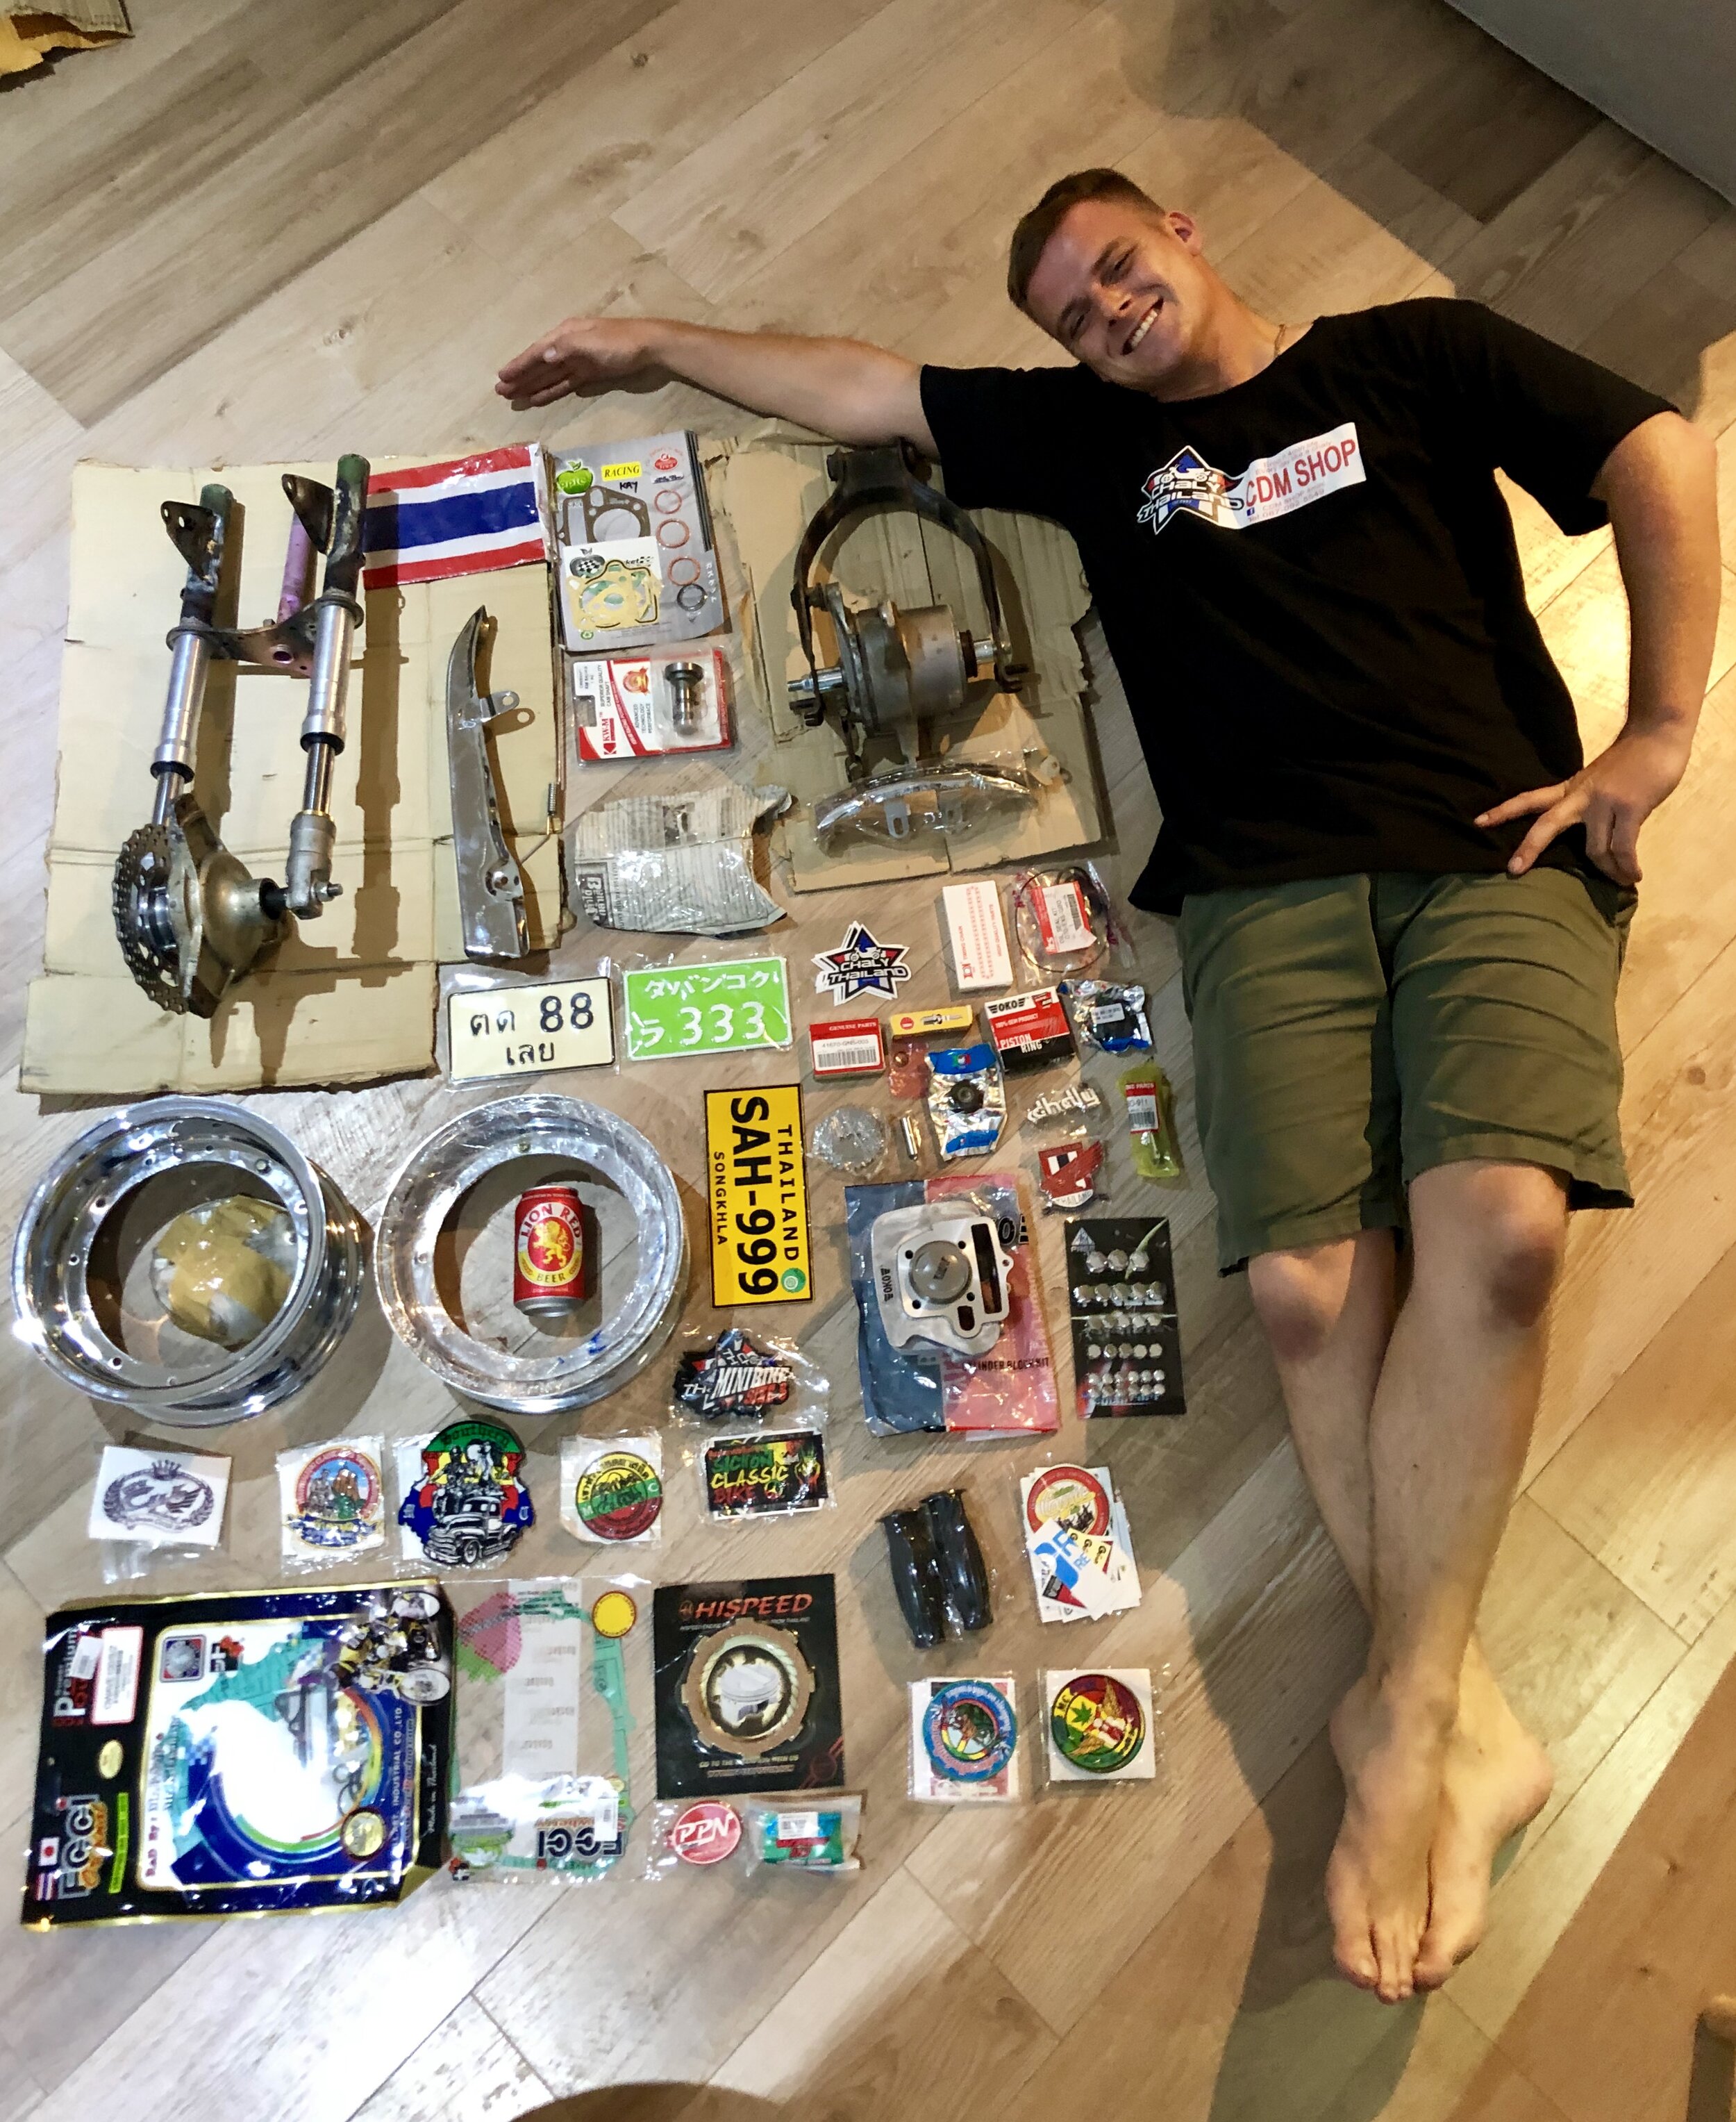 The final parts haul before I left